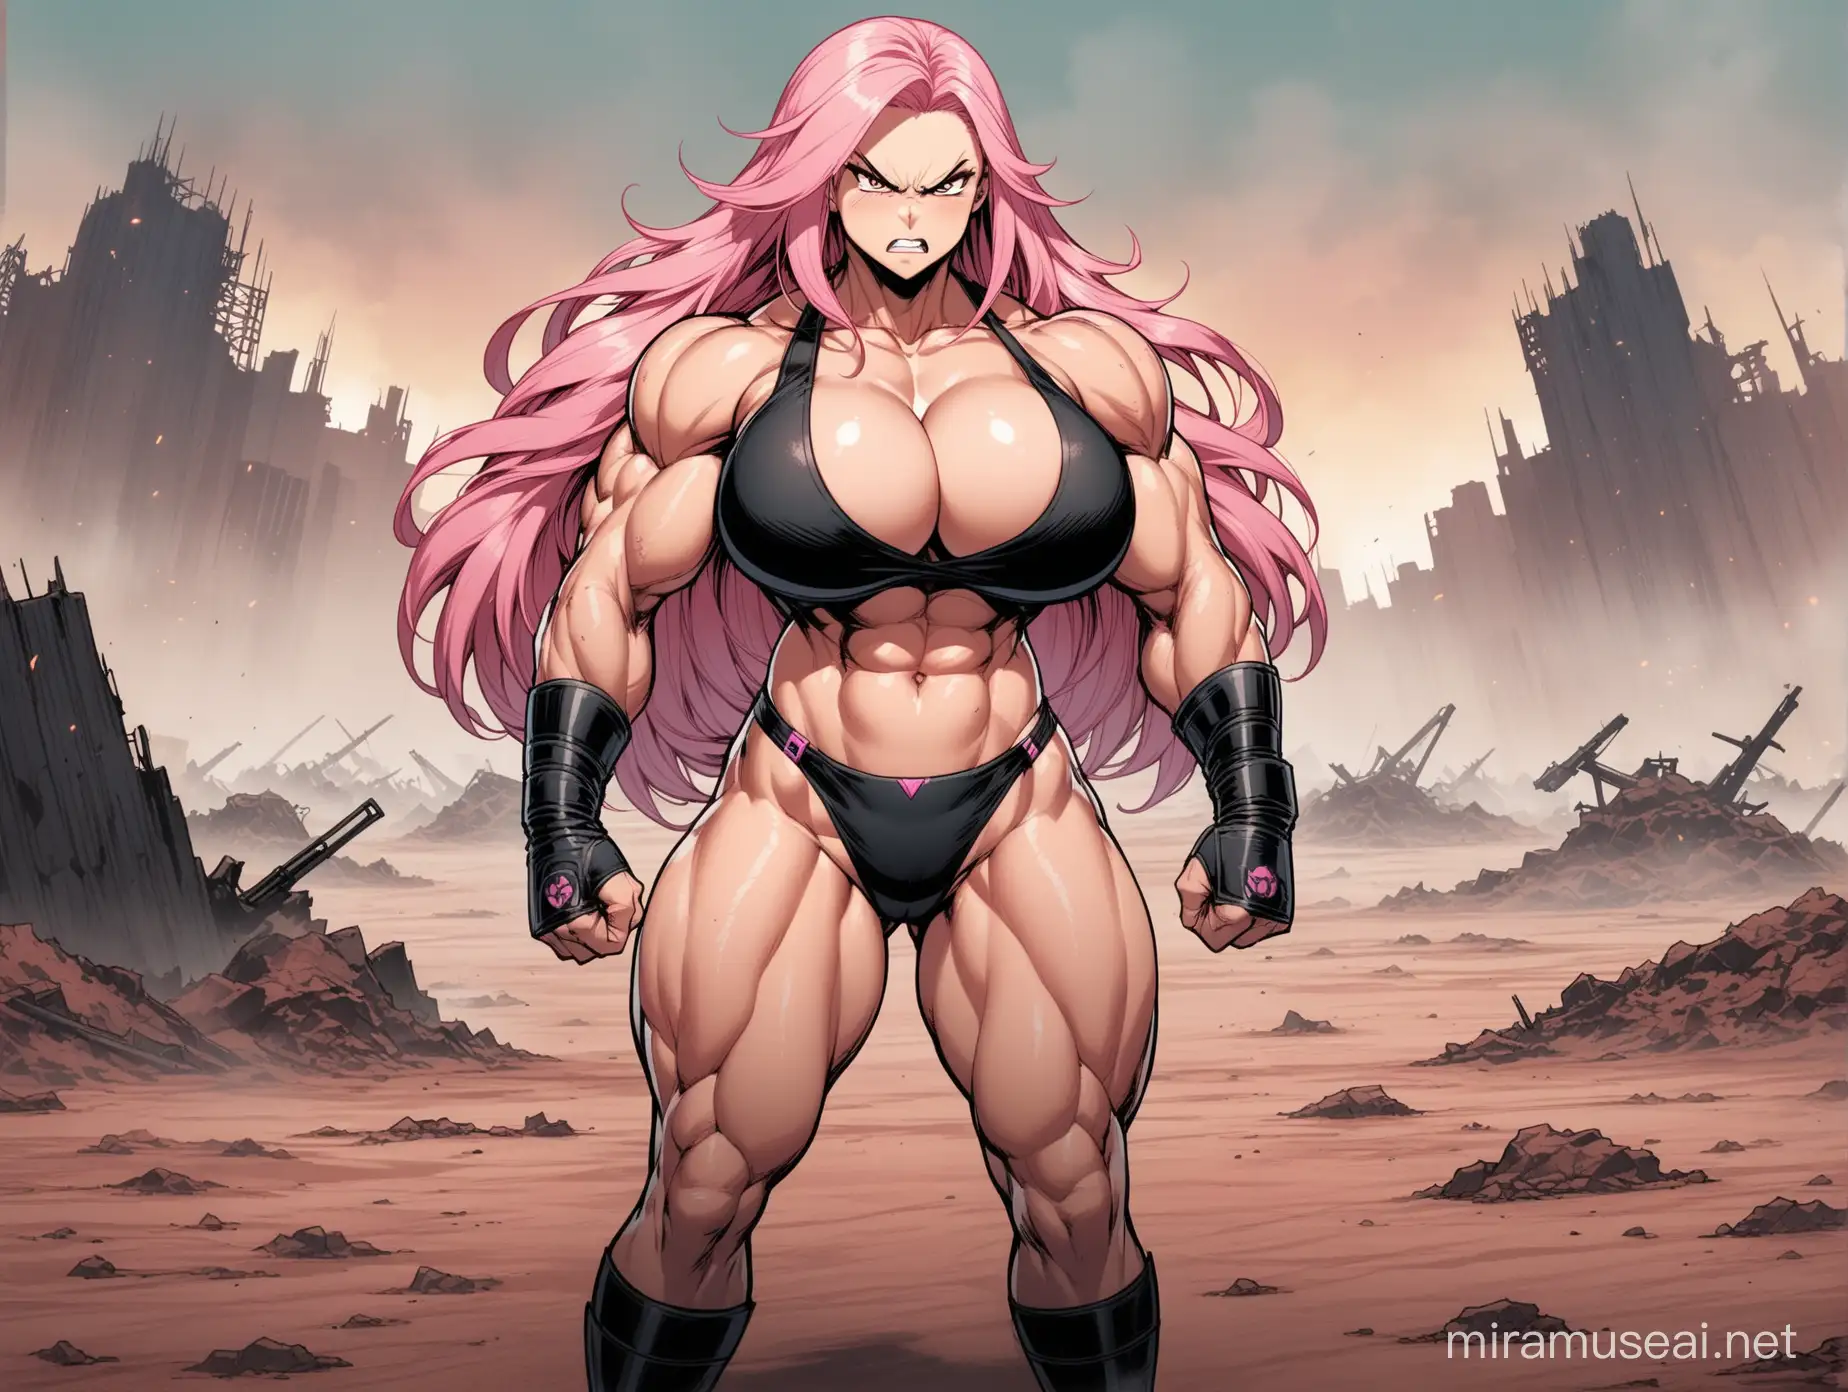 a muscular, big, strong, peach-skinned, angry, infamous woman, black suit with pink edges, big breasts, sturdy booty, desolate wasteland background, long fluffy pink hair.
